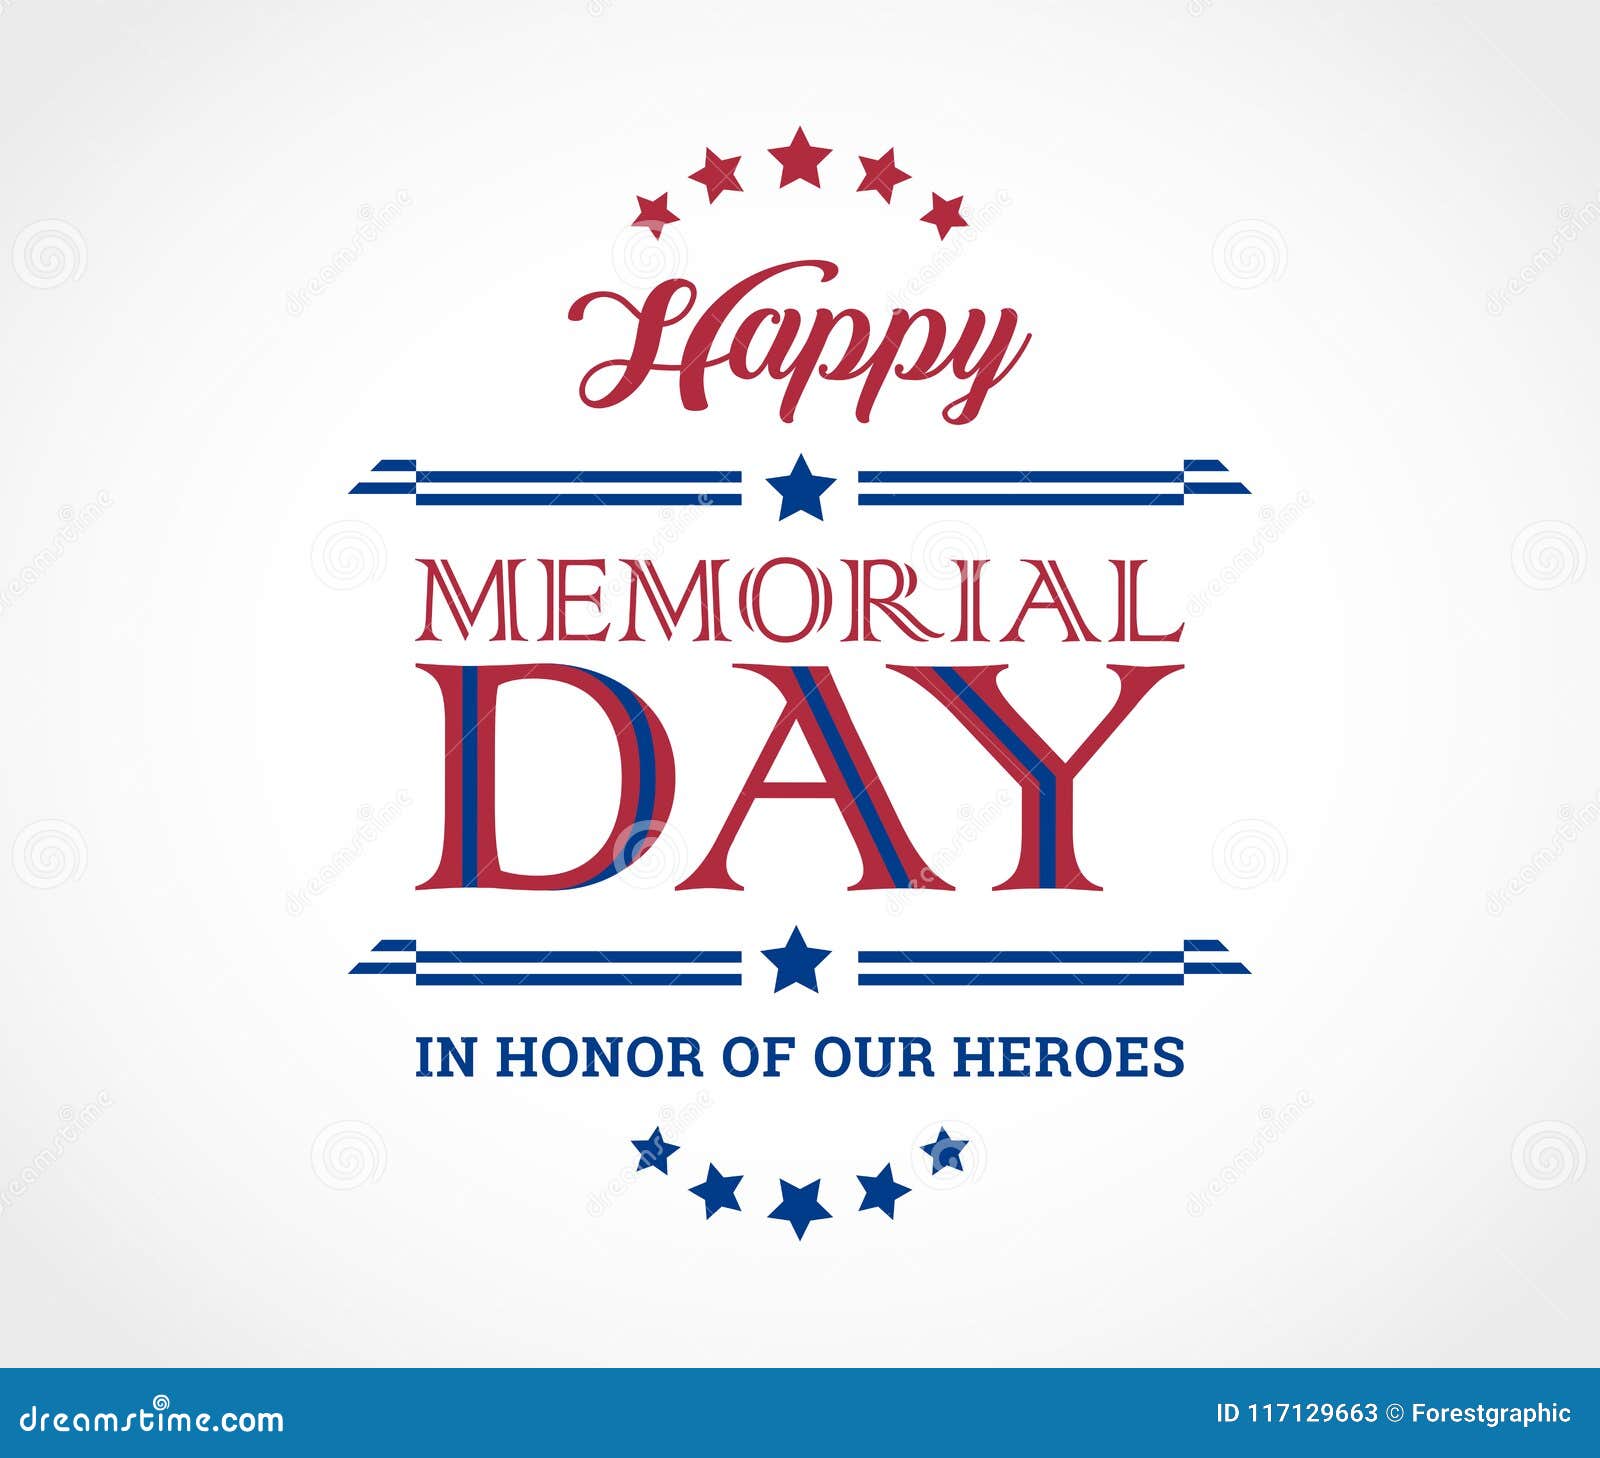 happy memorial day background with text in honor of our heroes -